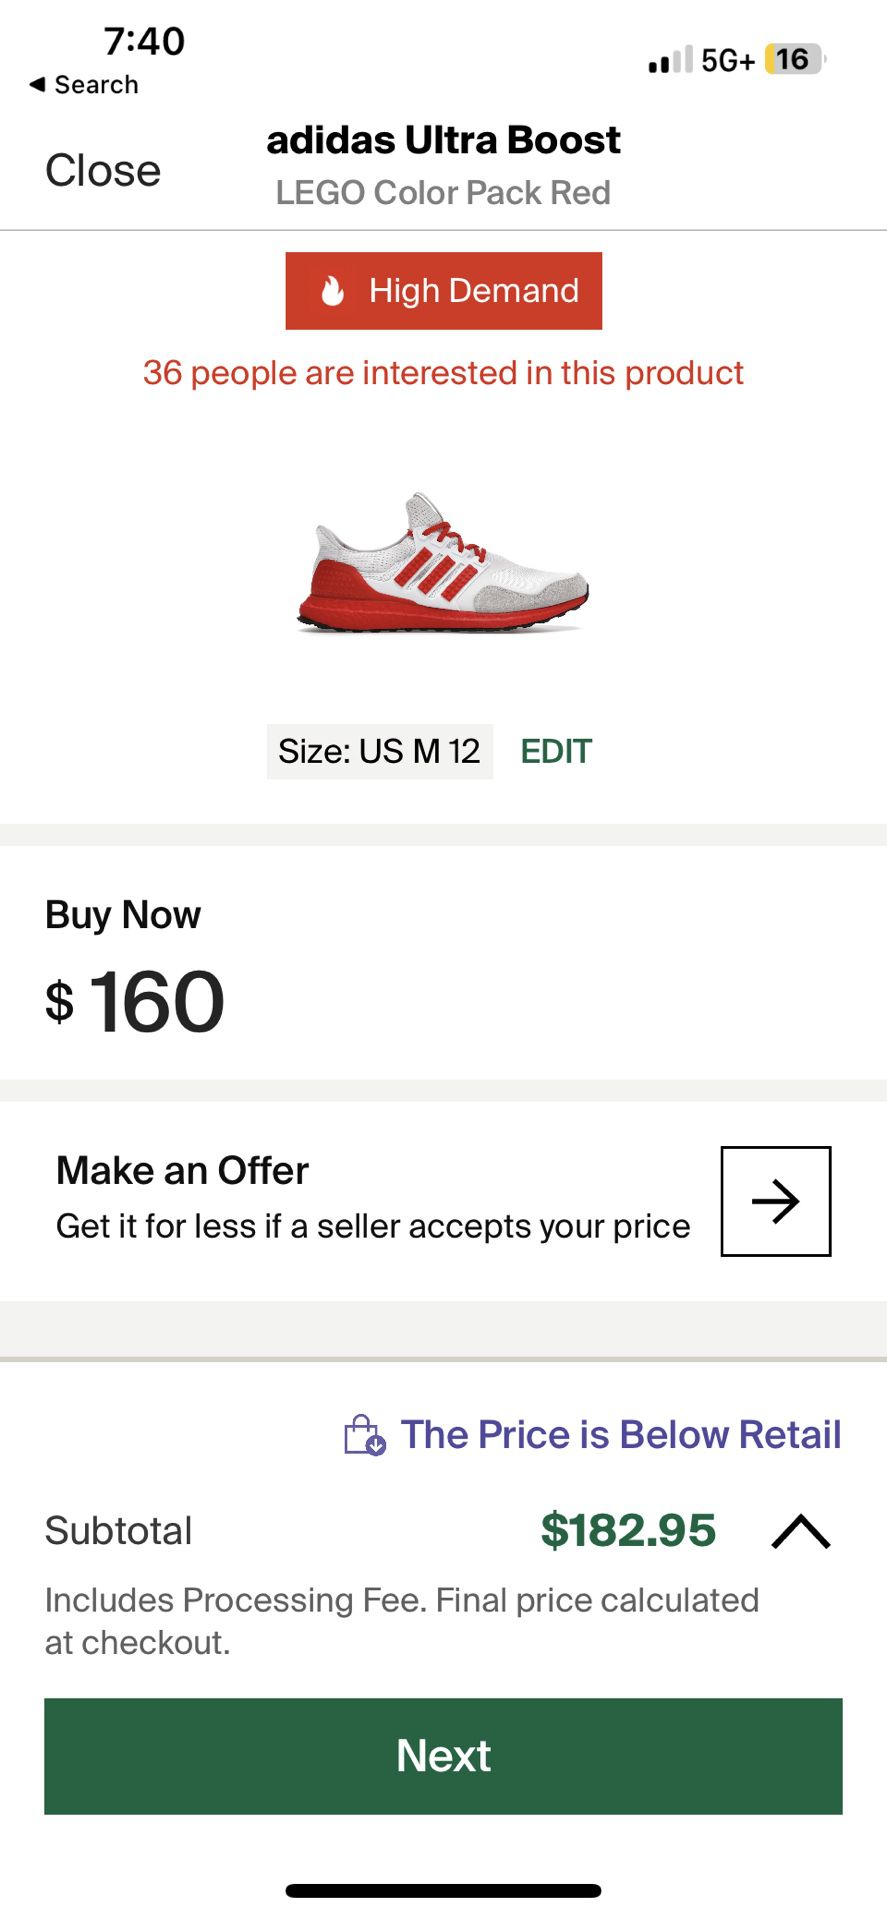 Adidas Ultra Boost LEGO Color Pack Red